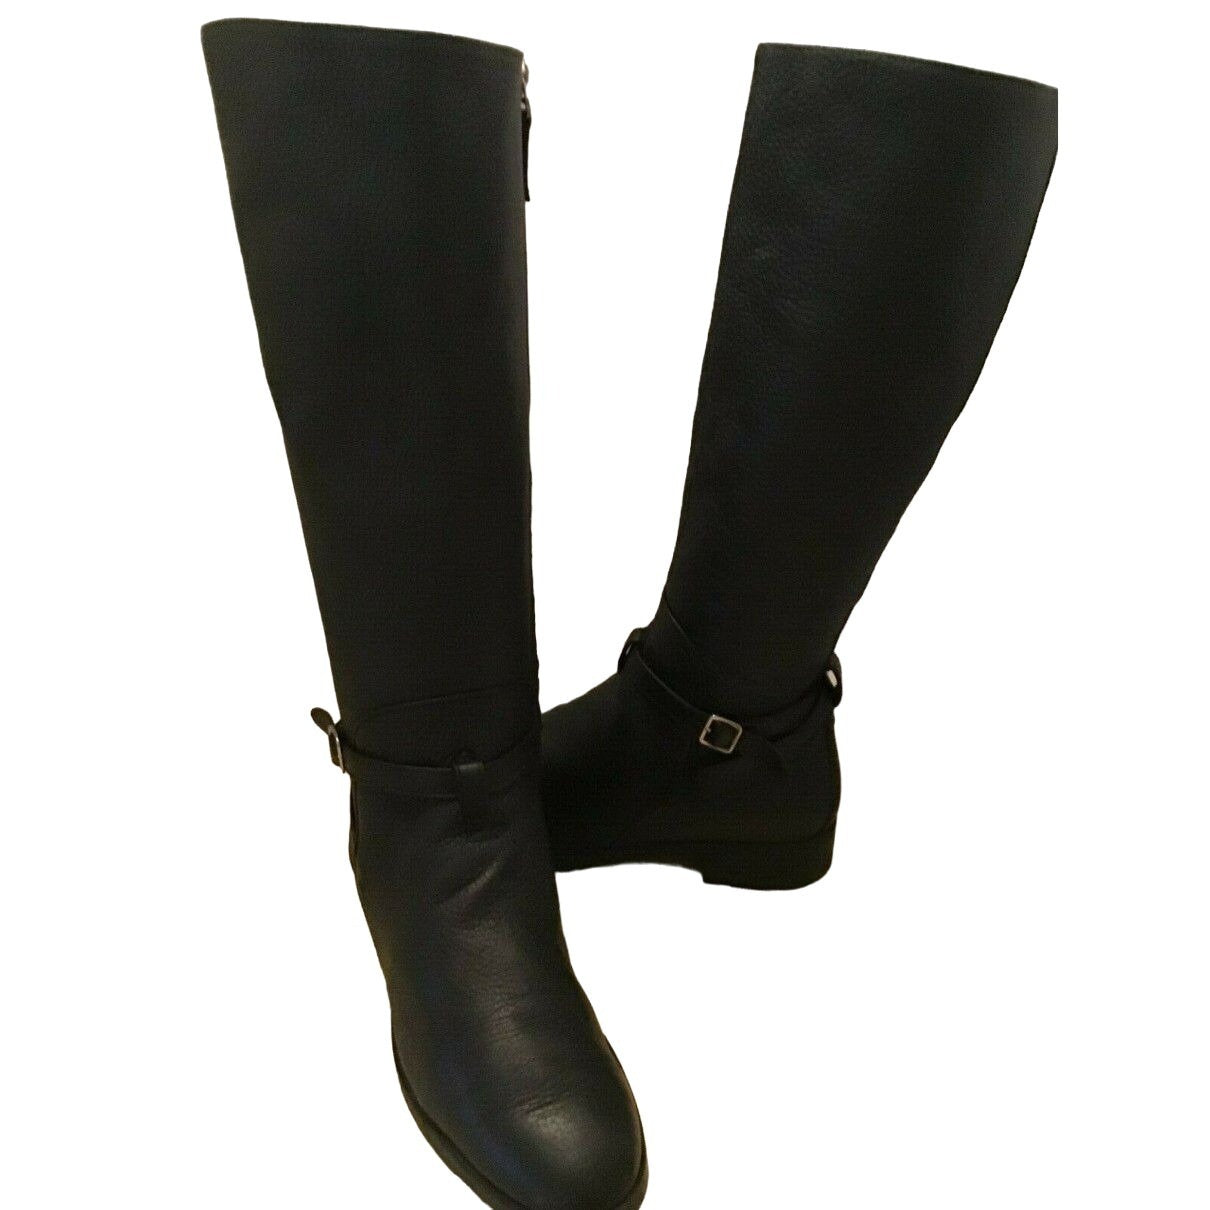 Bally Switzerland, size 9.5, black leather riding boots with chrome hardware, side zippers, almond toes and 1.5" block heels